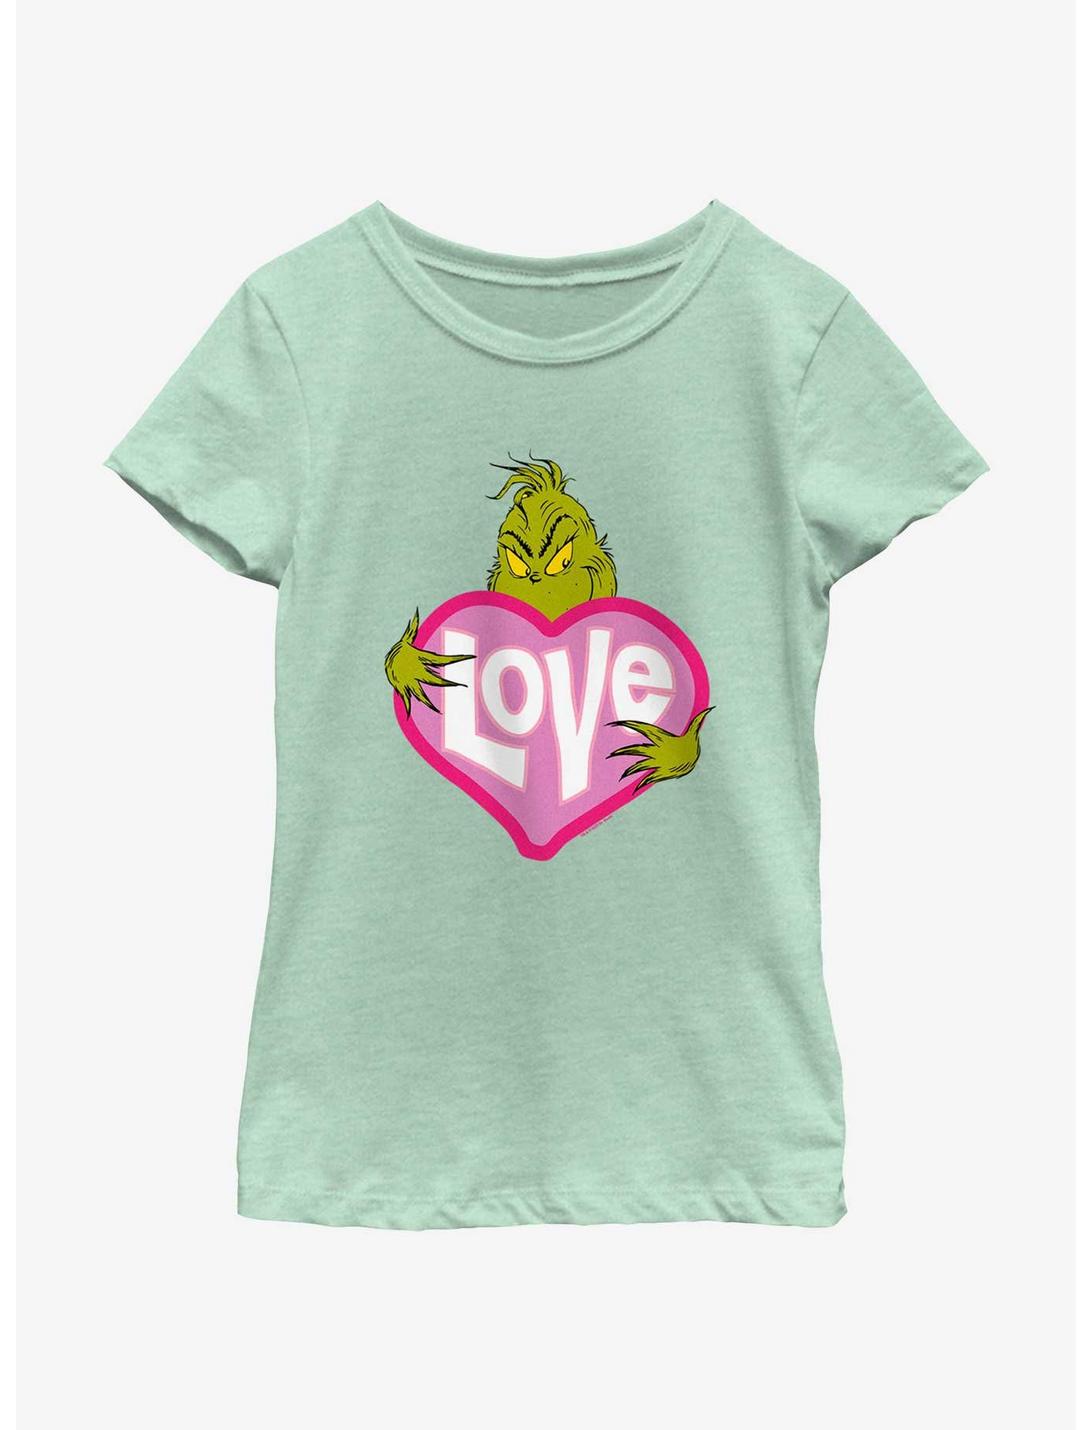 Dr. Seuss Love The Grinch Youth Girls T-Shirt, MINT, hi-res